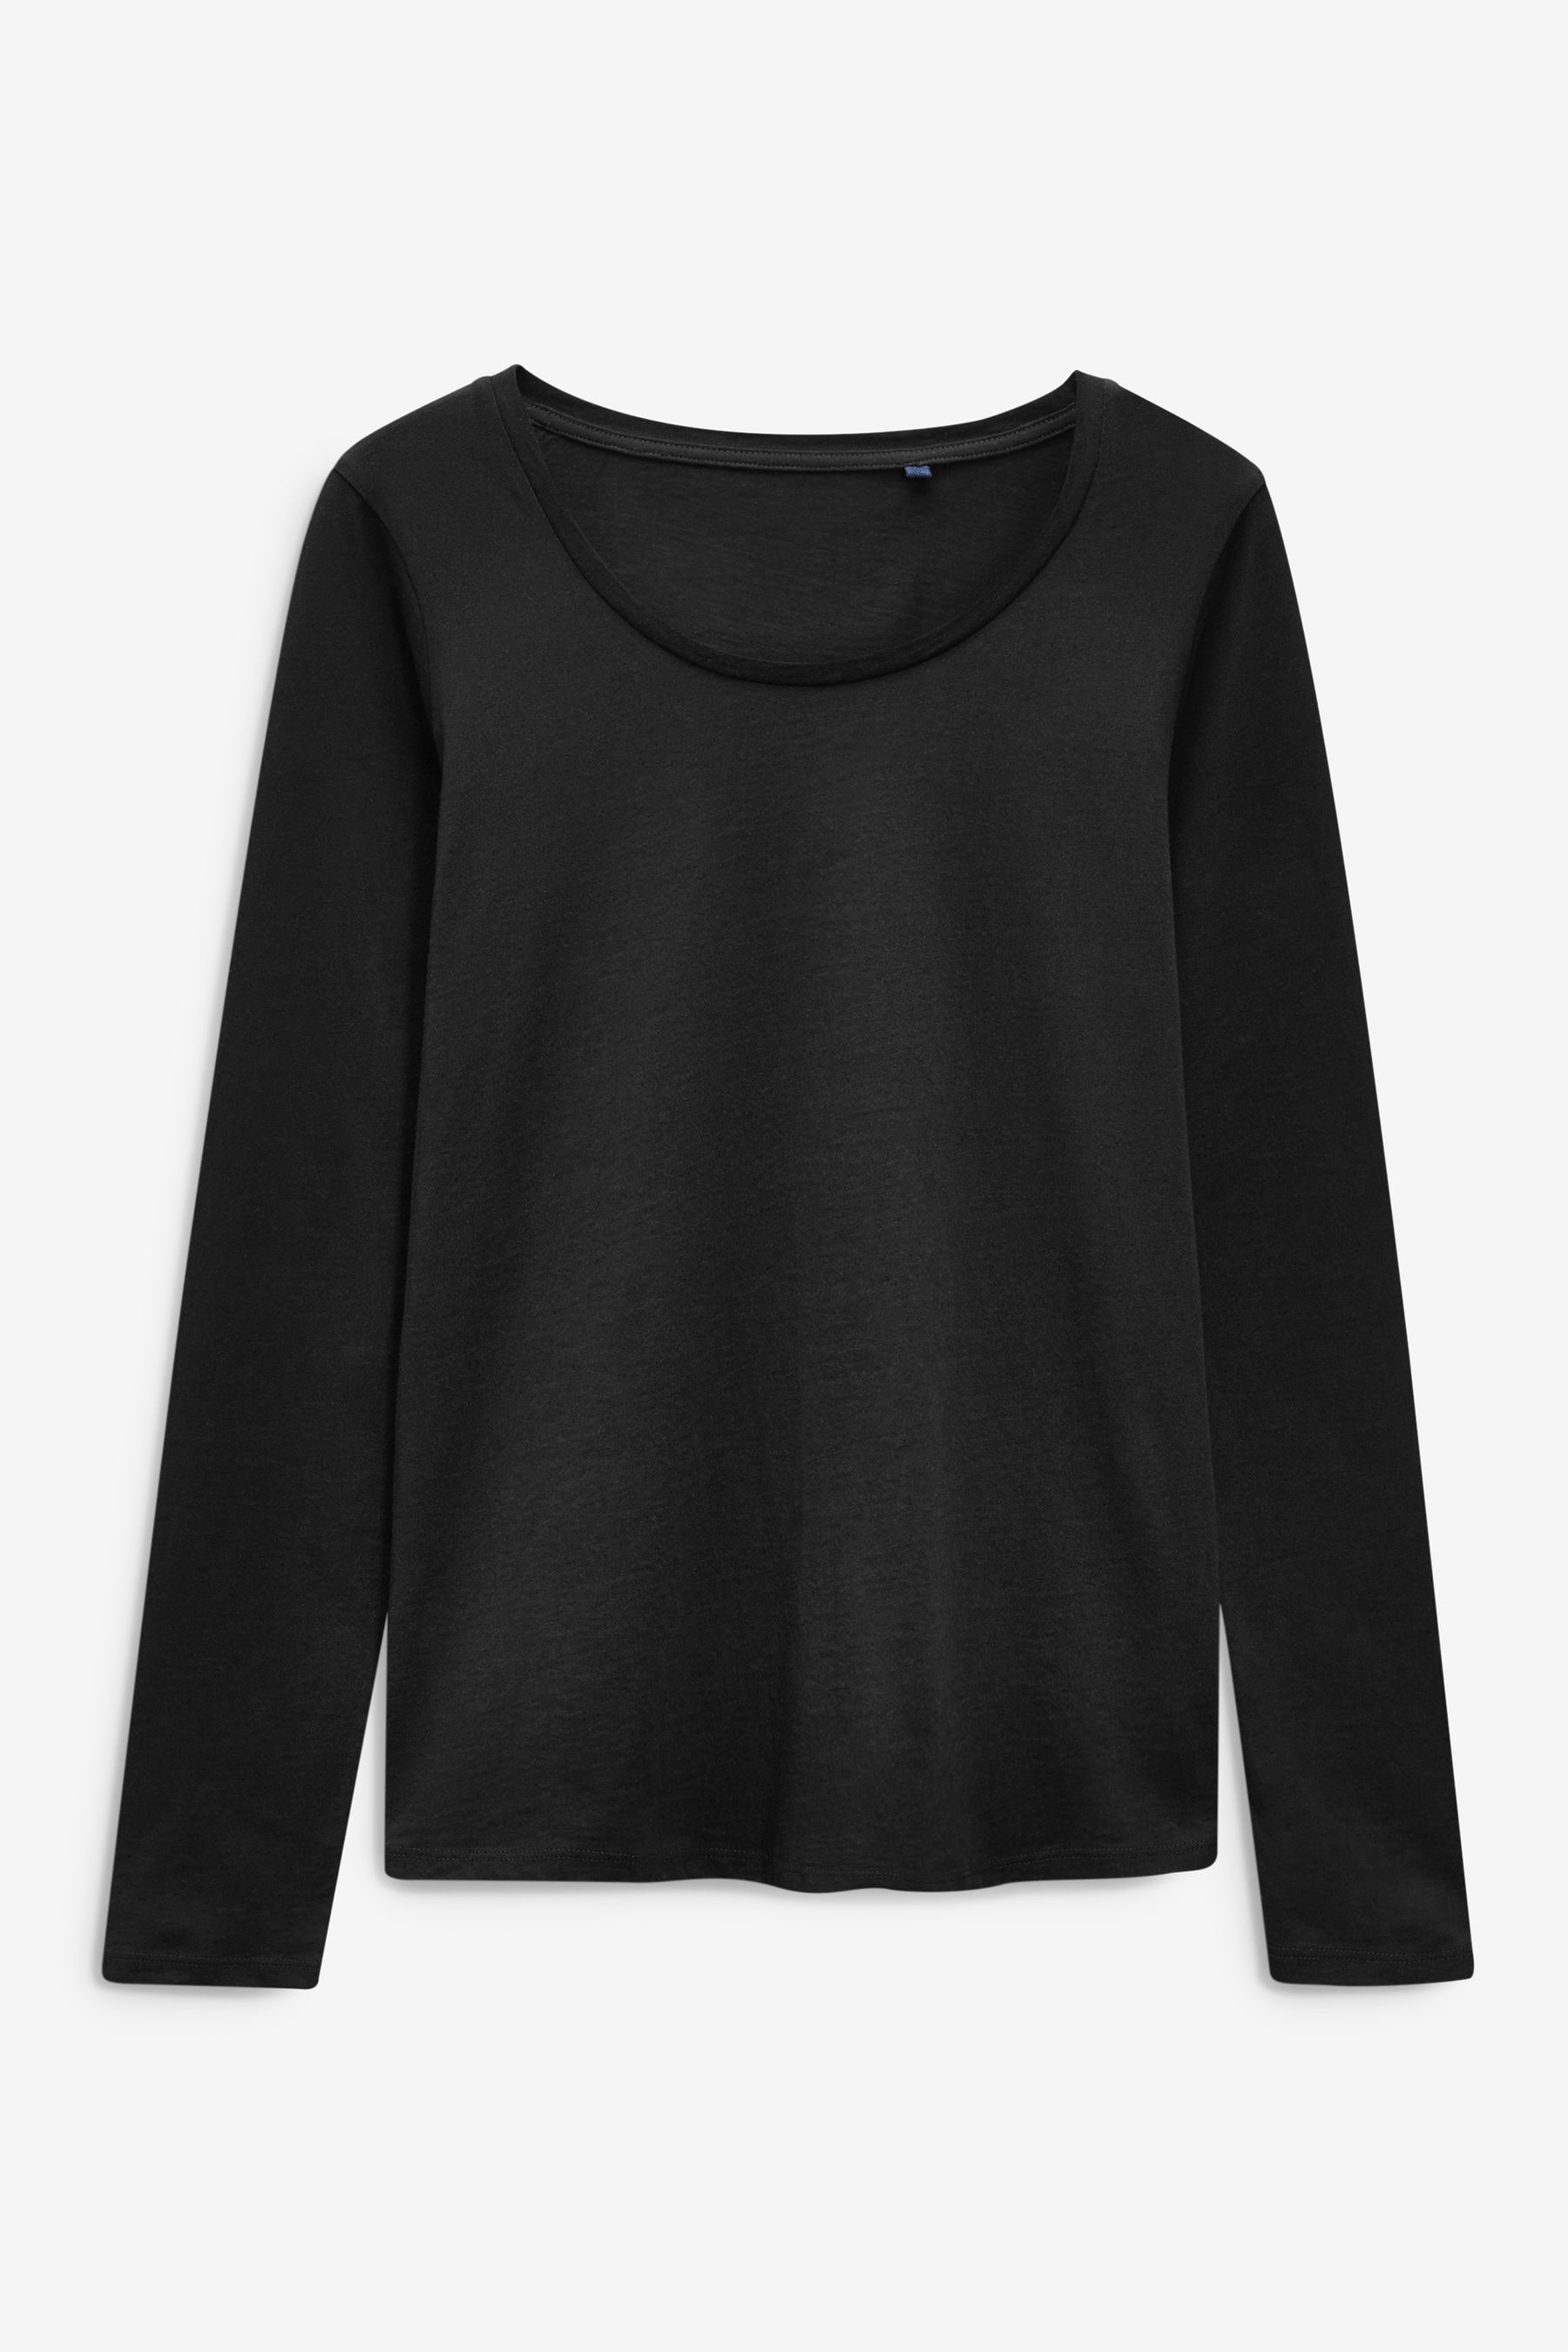 Buy Black Long Sleeve Crew Neck Top from the Next UK online shop